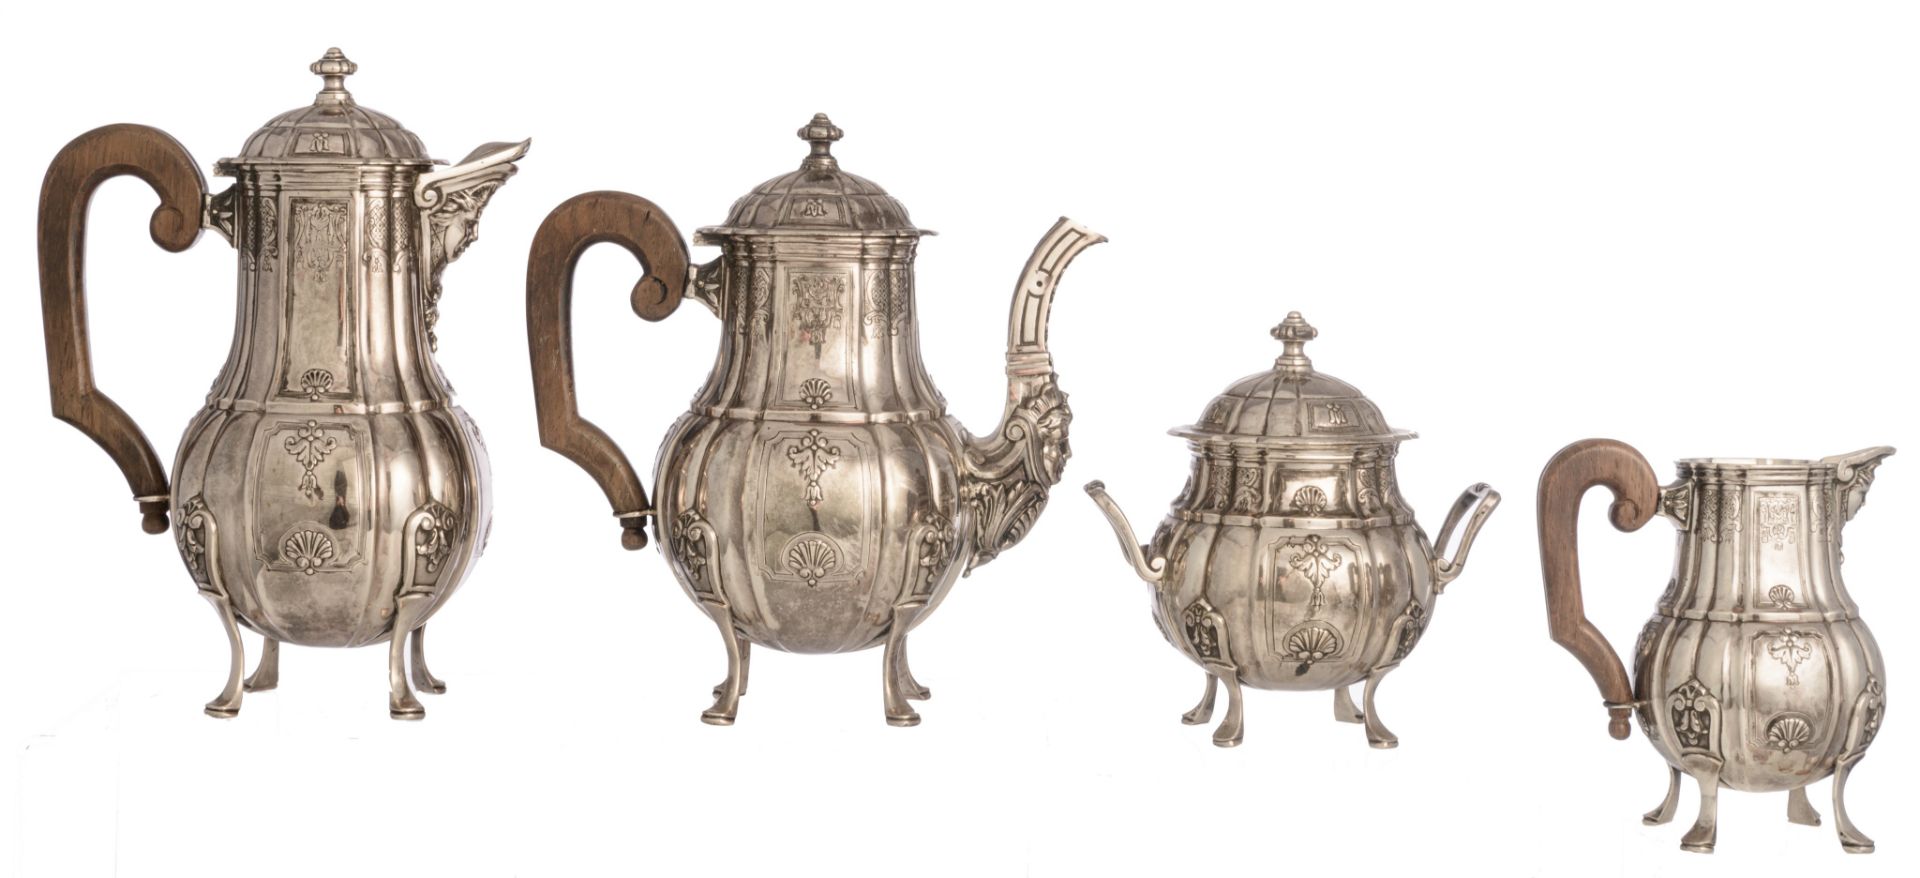 A four-part Belgian silver coffee and tea set, H 15 - 29 cm / total weight c. 4.290 g - Image 3 of 13